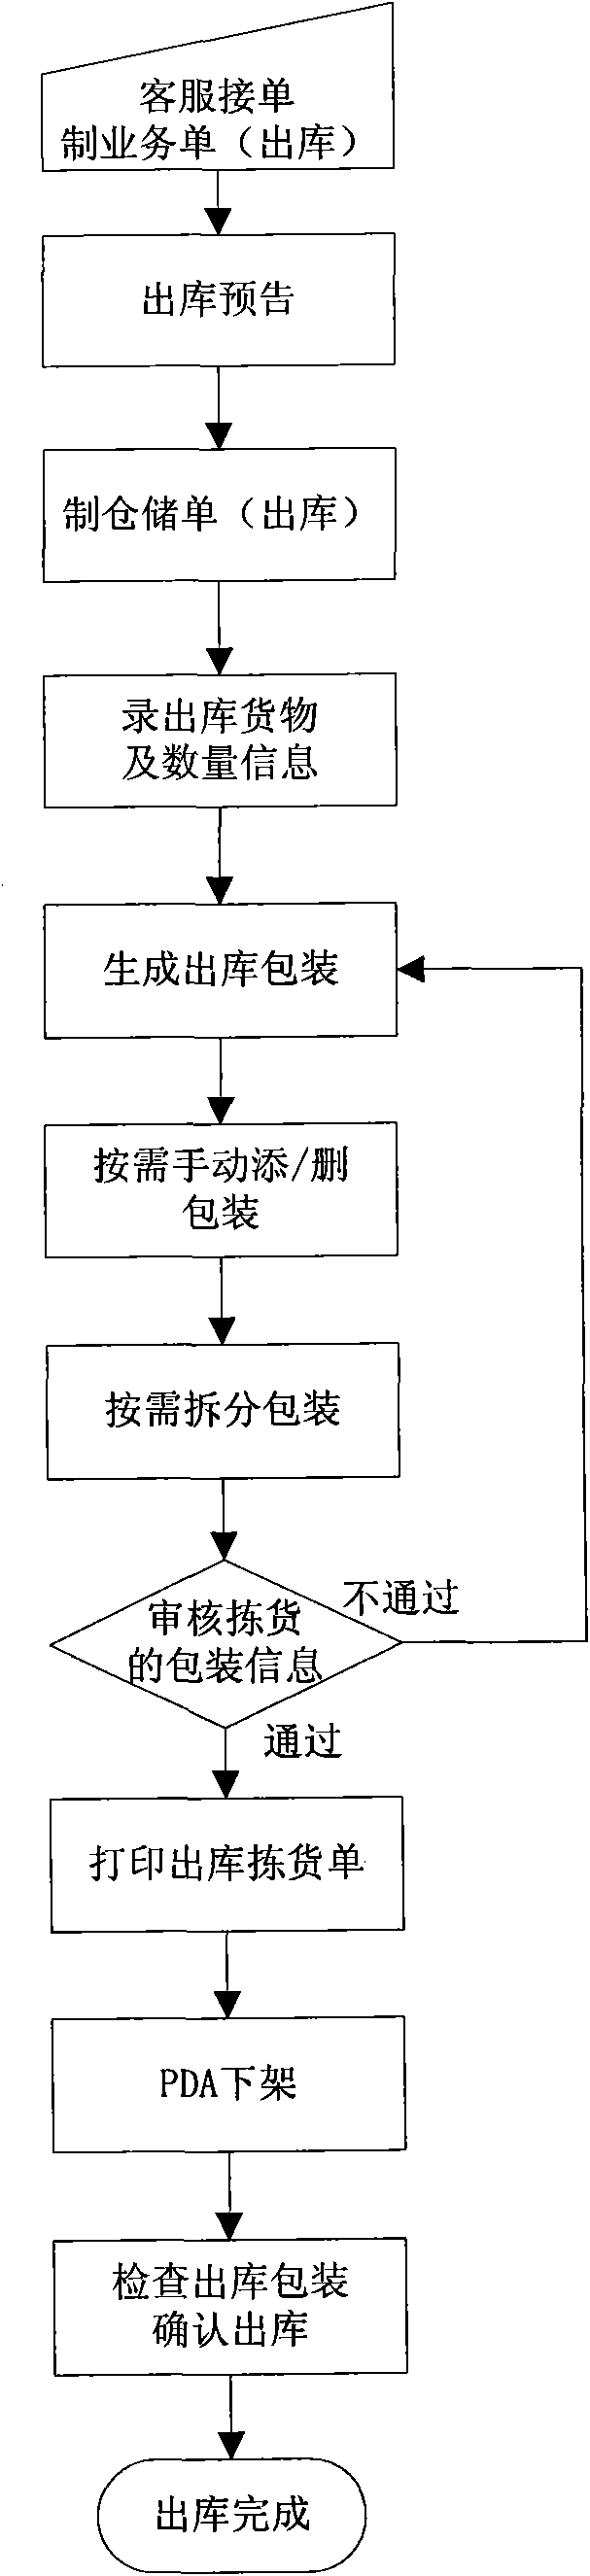 System for managing warehousing services on wireless mobile basis